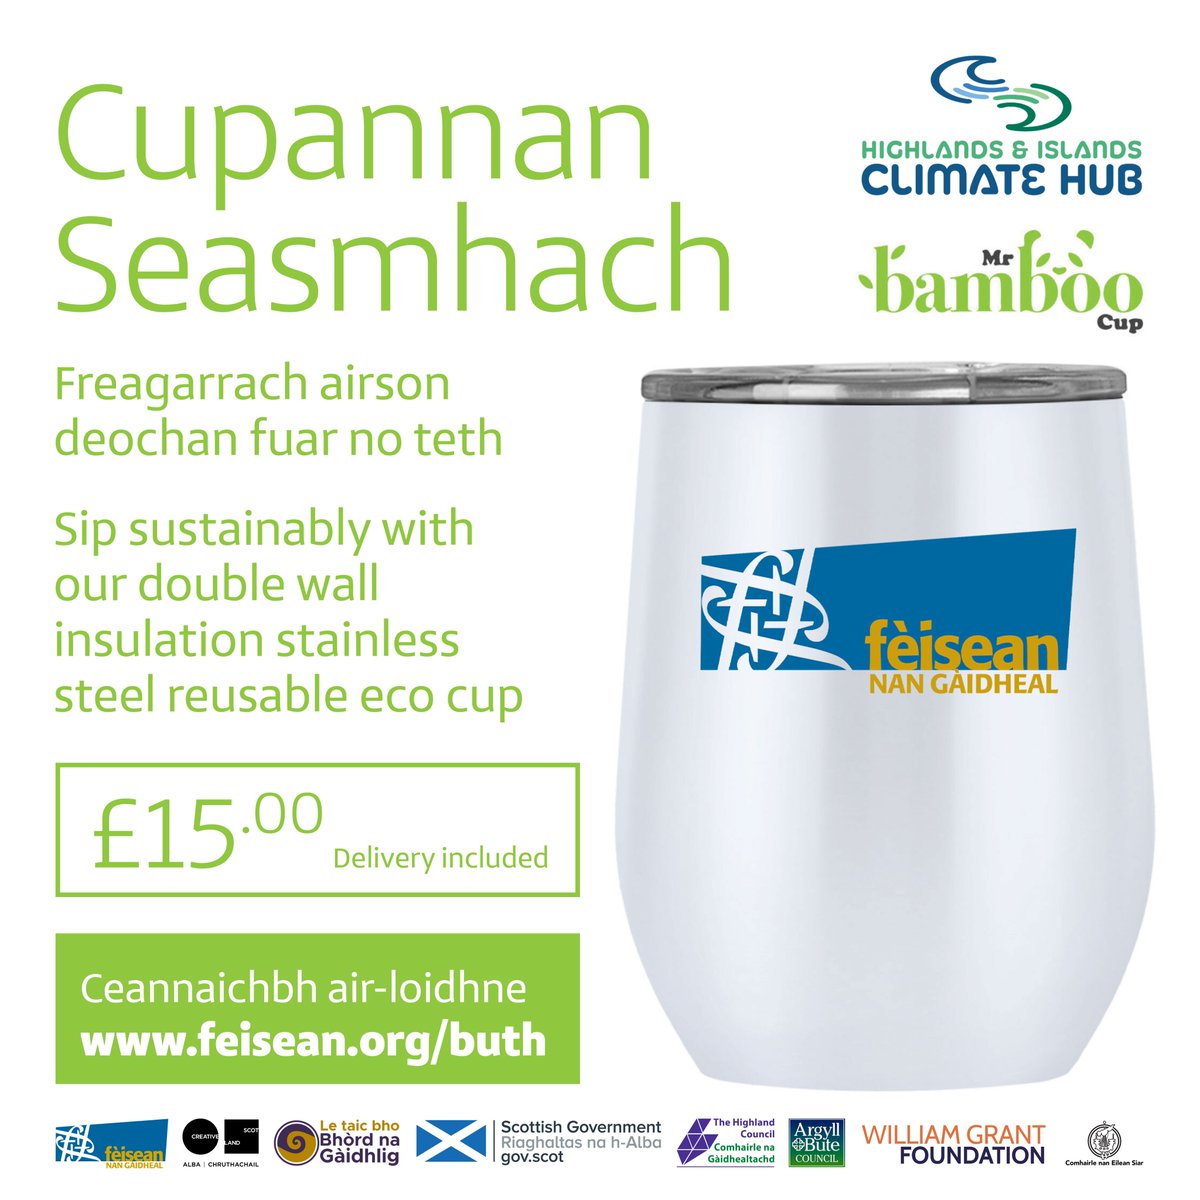 Gabhaibh balgam neo-chronail dhan àrainneachd! Say goodbye to disposable cups and embrace sustainability with our eco-friendly cup! Thanks to @HIClimateHub for support. Buy online at shorturl.at/juK16